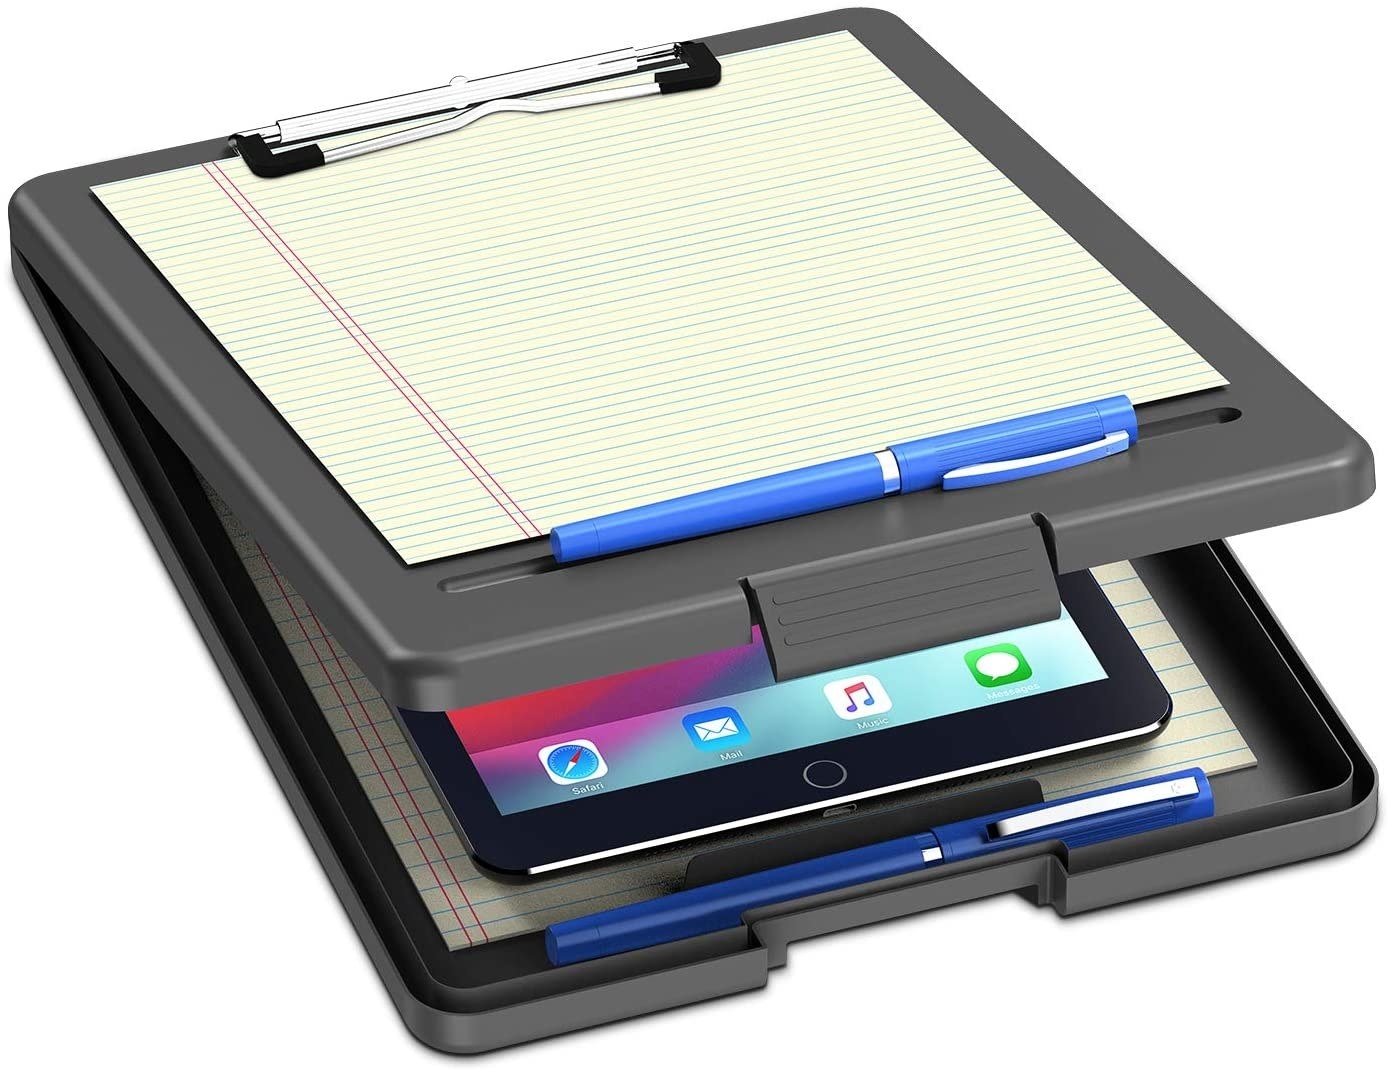 product image of the clipboard, open to show storage space with iPad inside